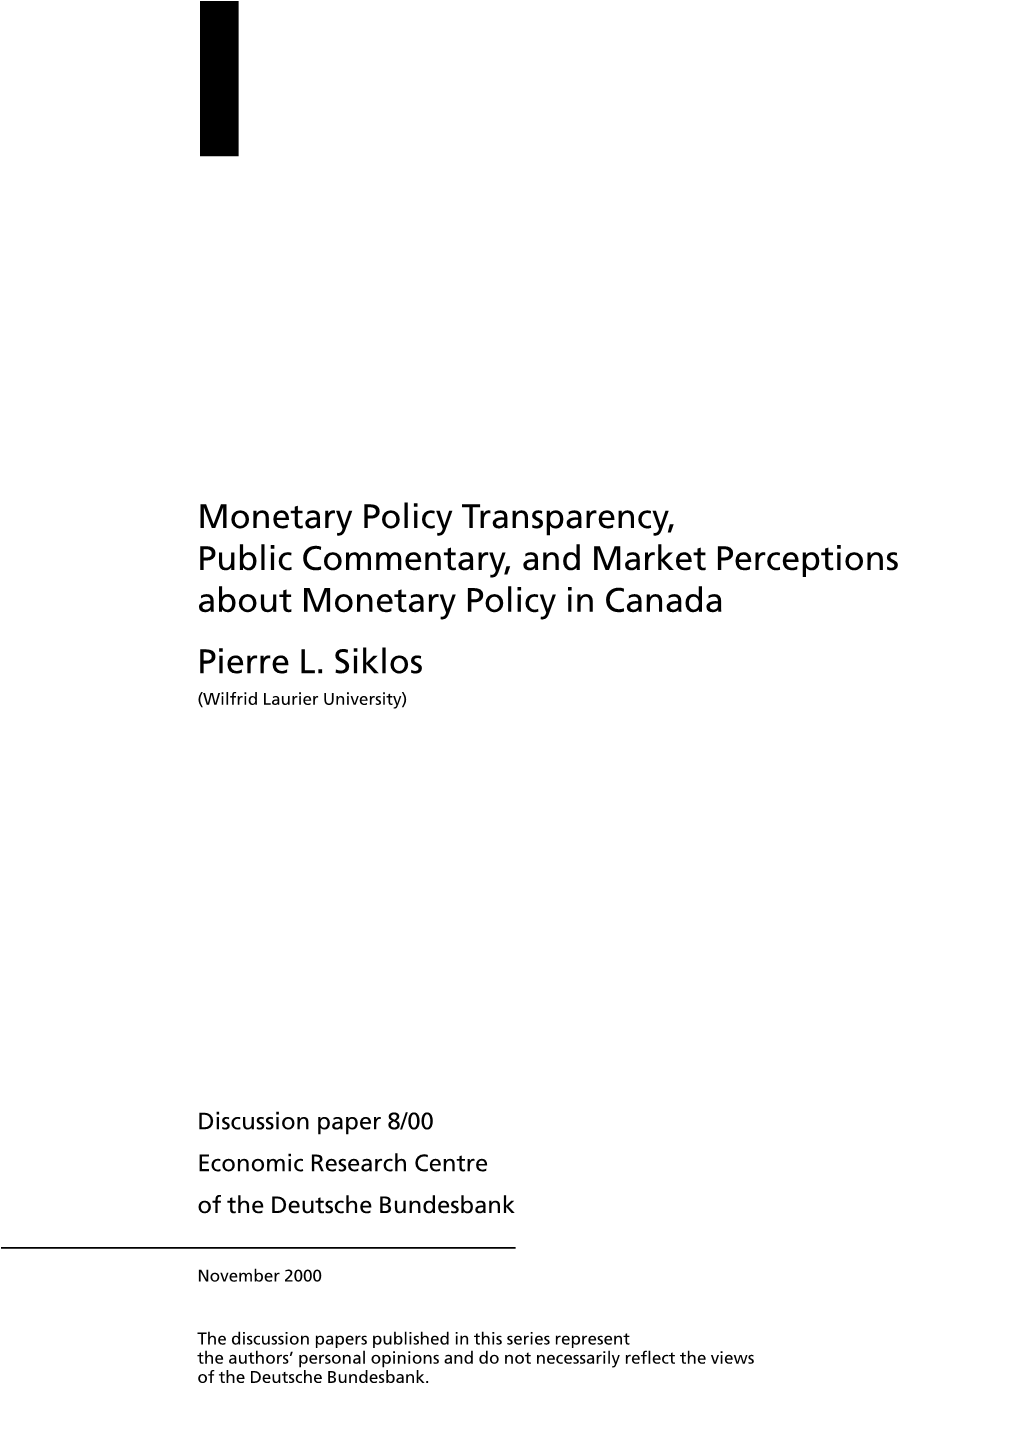 Monetary Policy Transparency, Public Commentary, and Market Perceptions About Monetary Policy in Canada Pierre L